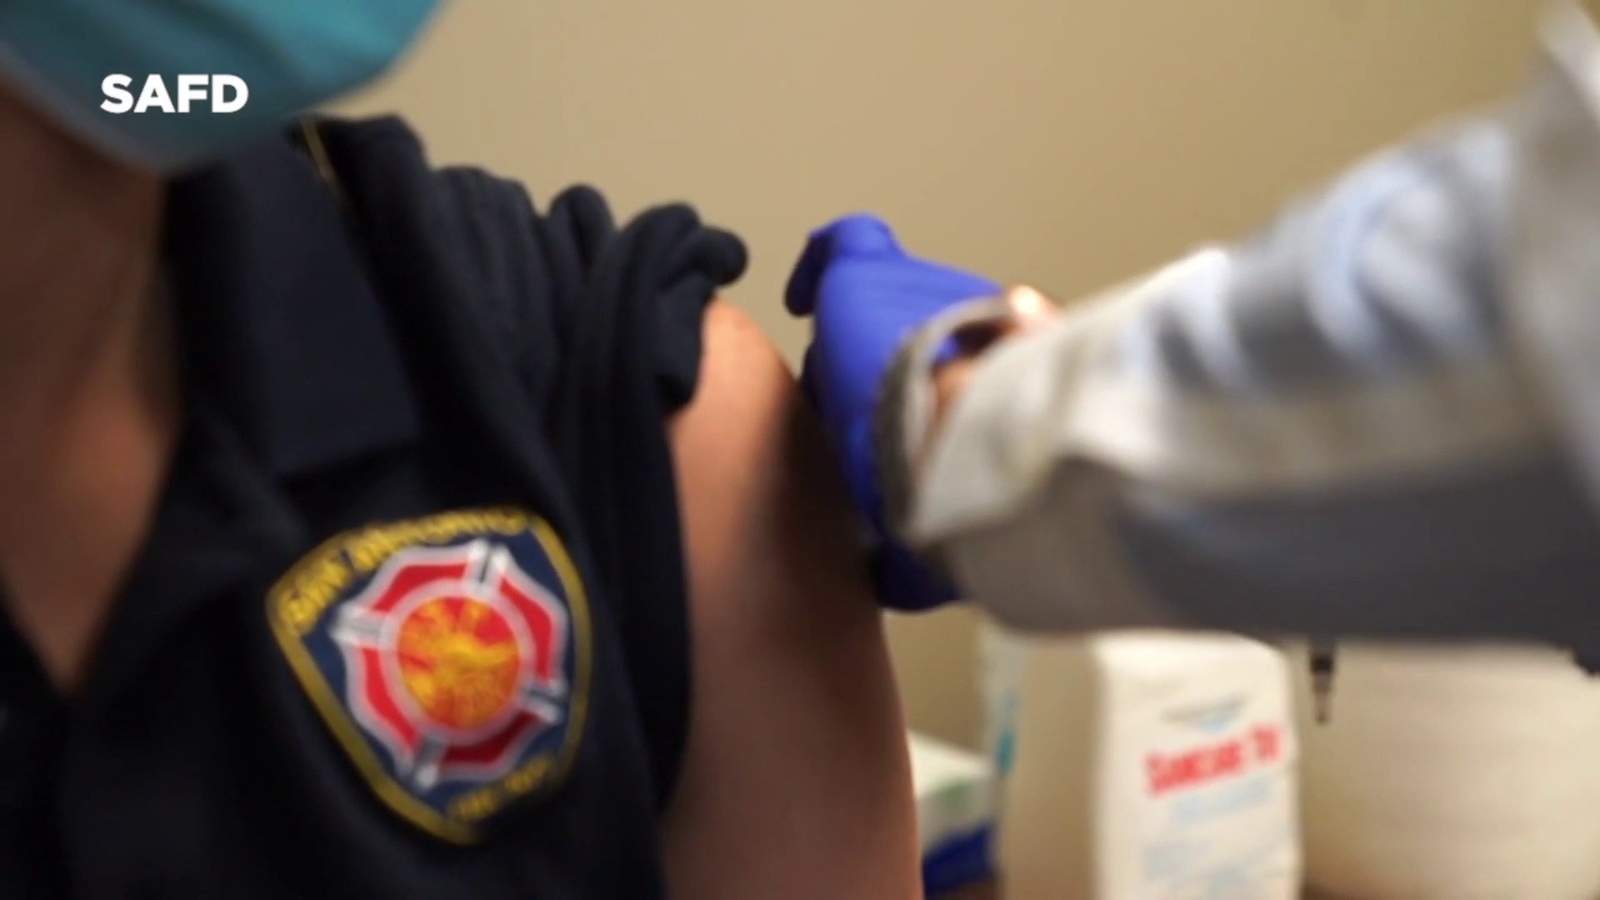 San Antonio Fire Department EMS personnel roll up their sleeves for COVID-19 vaccine